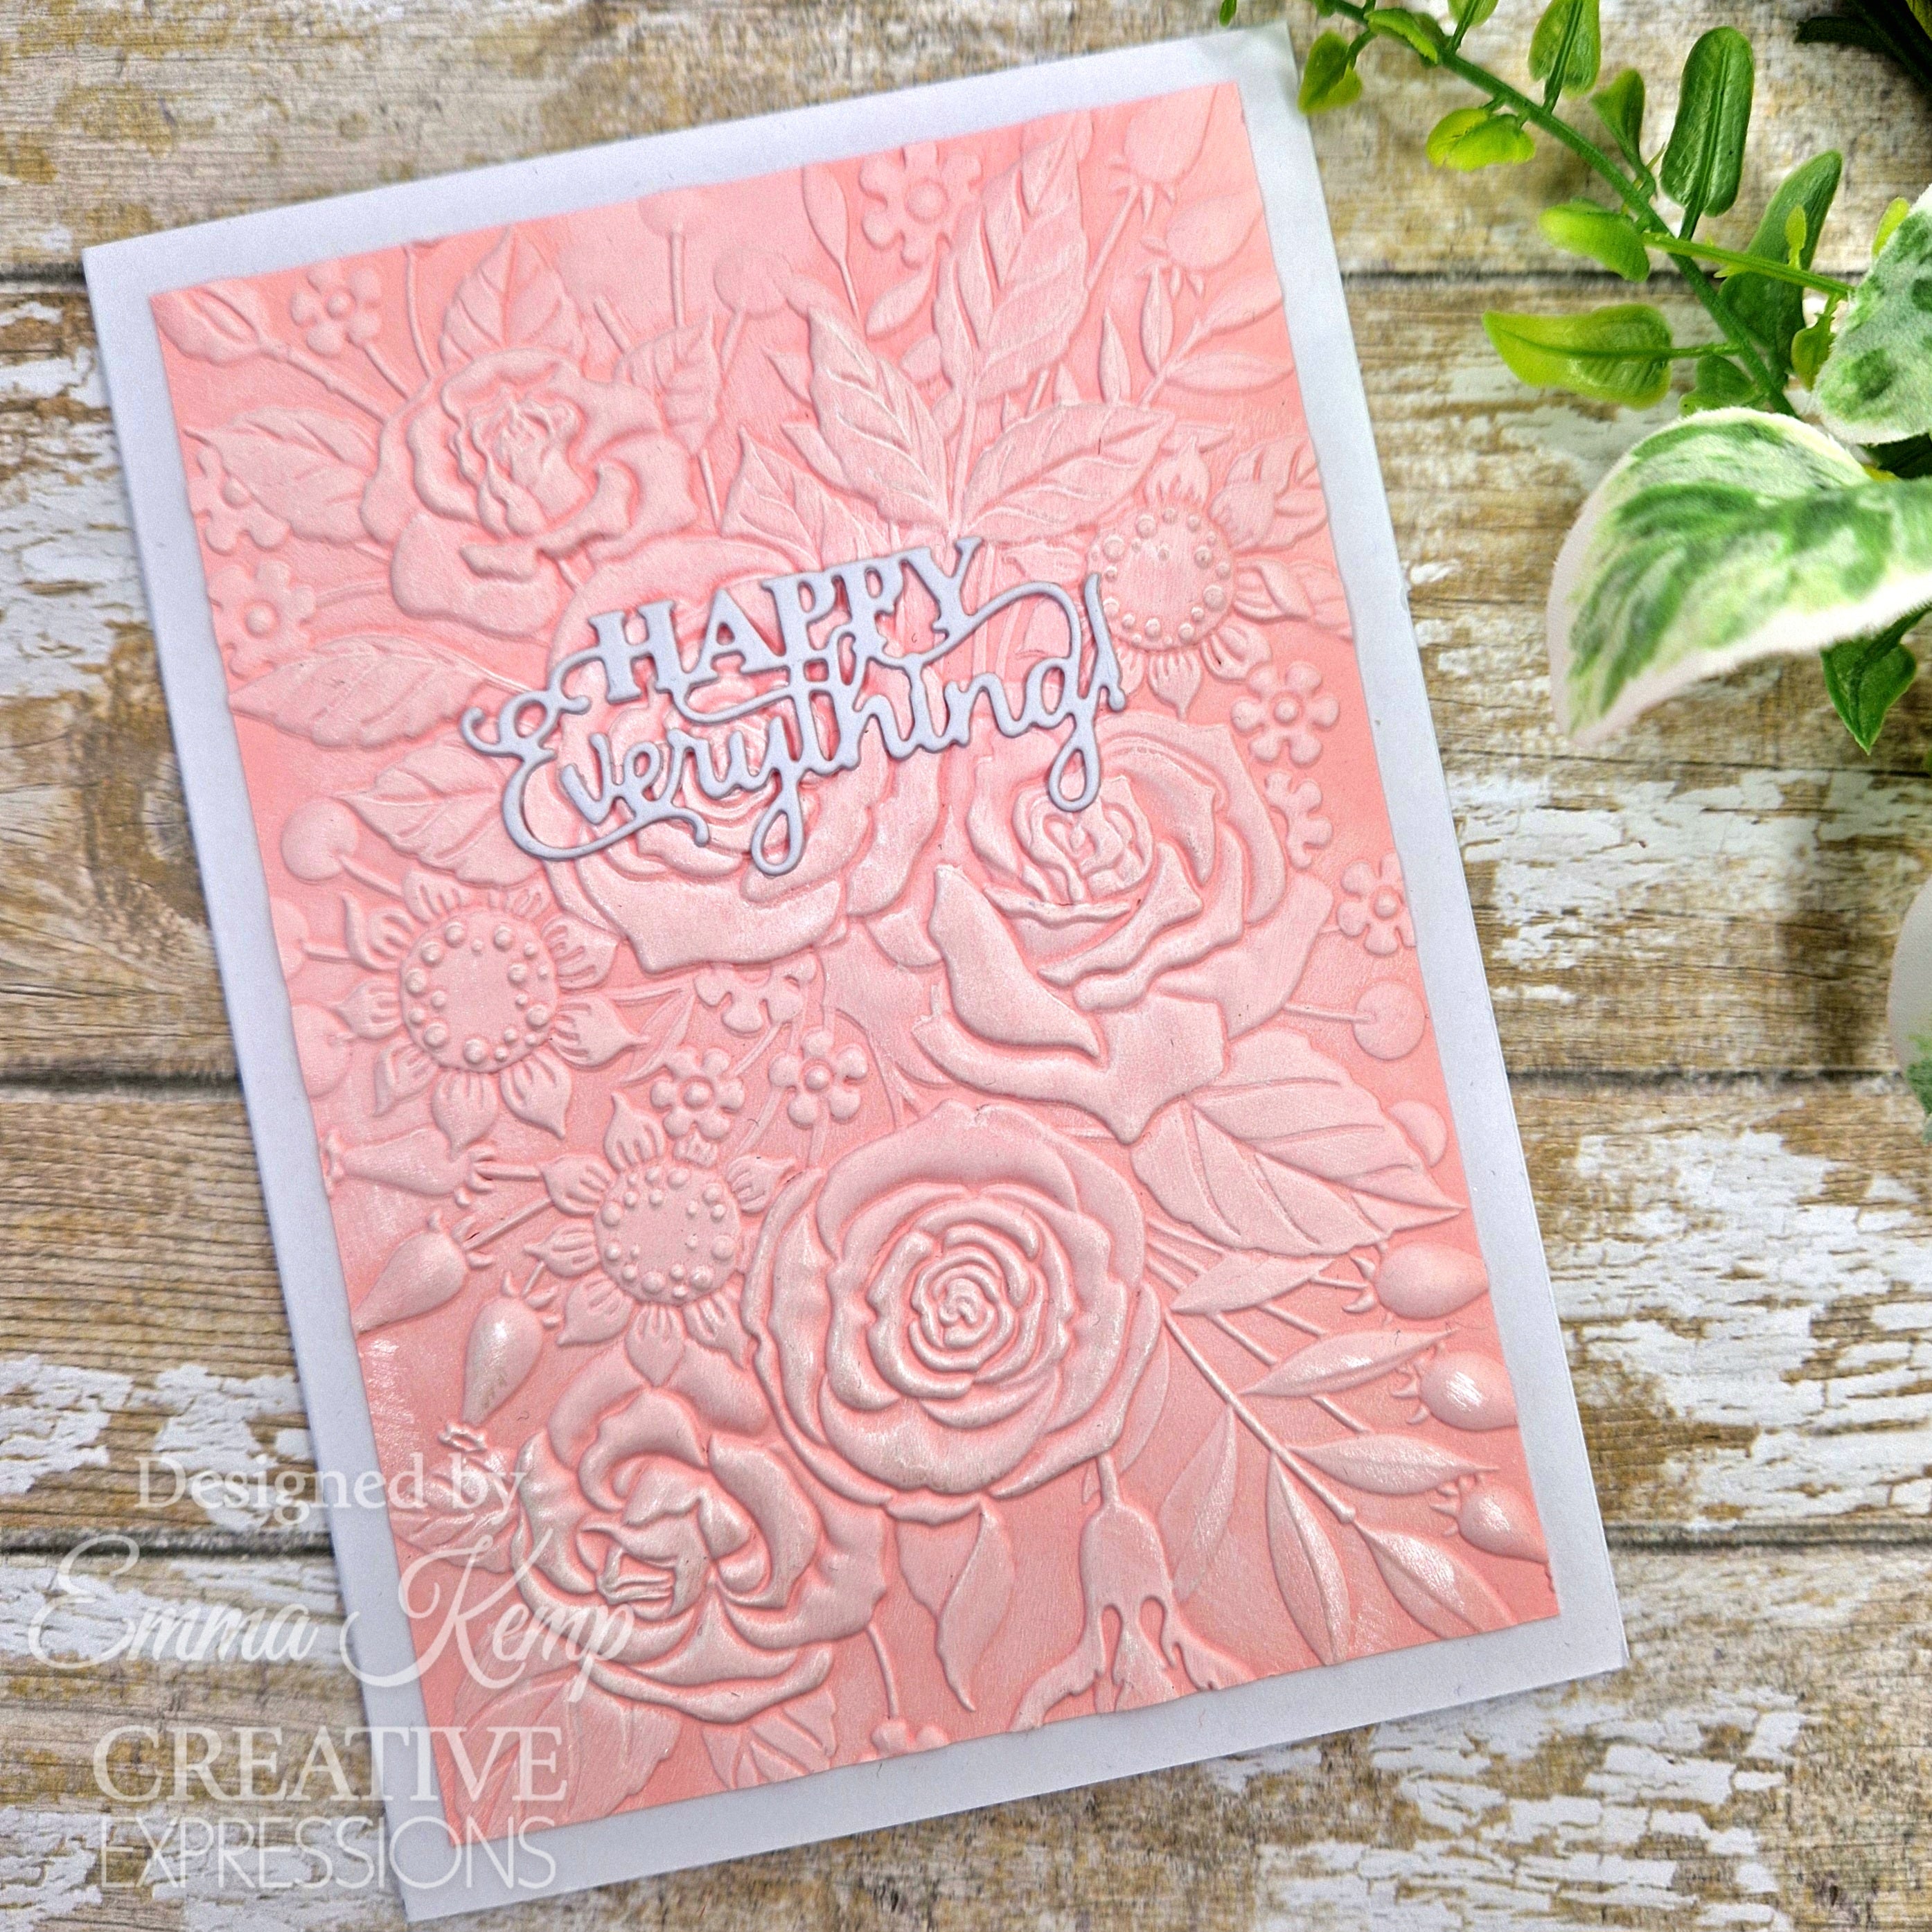 Creative Expressions Rose Garden Companion Colouring Stencil 6 in x 8 in Set of 2